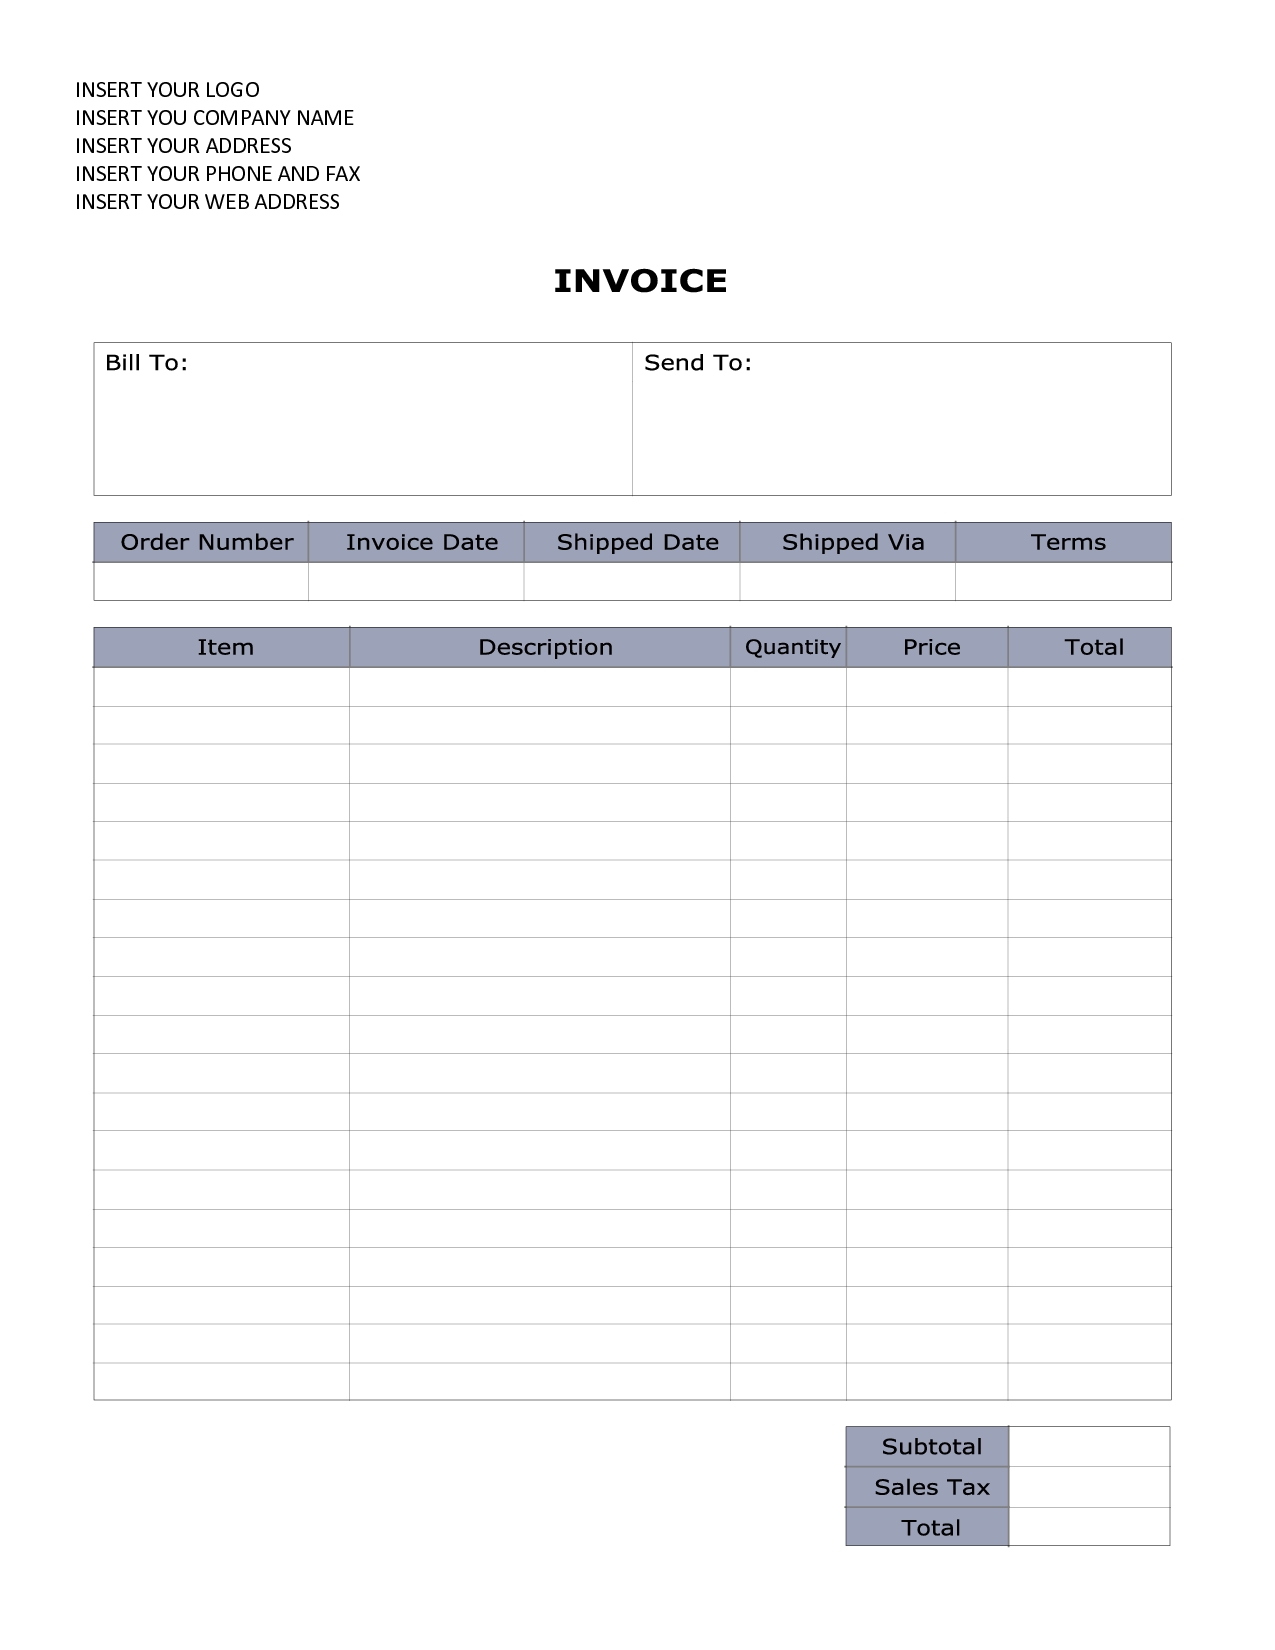 invoices in word printable invoice template word free printable invoice invoice 1275 X 1650